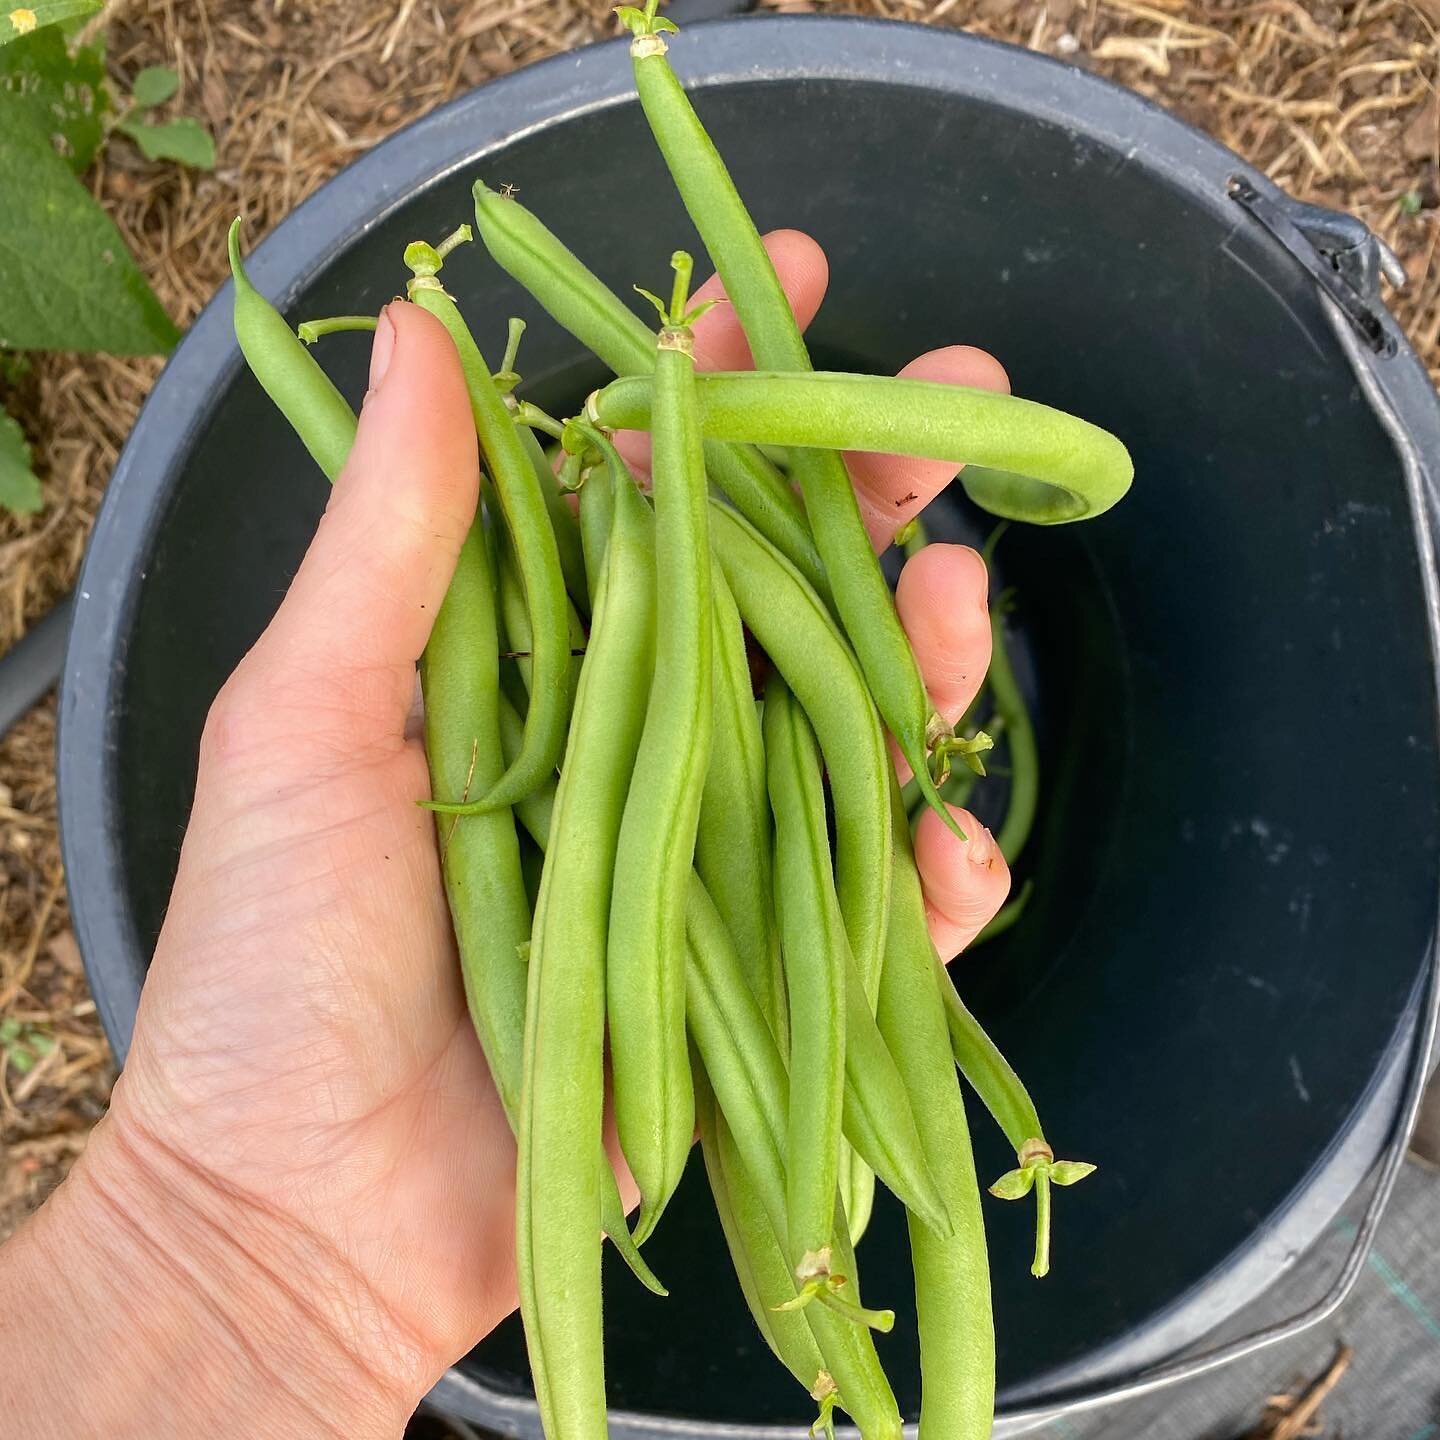 &ldquo;The BEST beans we&rsquo;ve ever had! Didn&rsquo;t even make it to the dinner table, we had eaten them all before we even got to cook them! Gotta get heaps more next week&rdquo;

Just another message we got from one of our customers this week, 